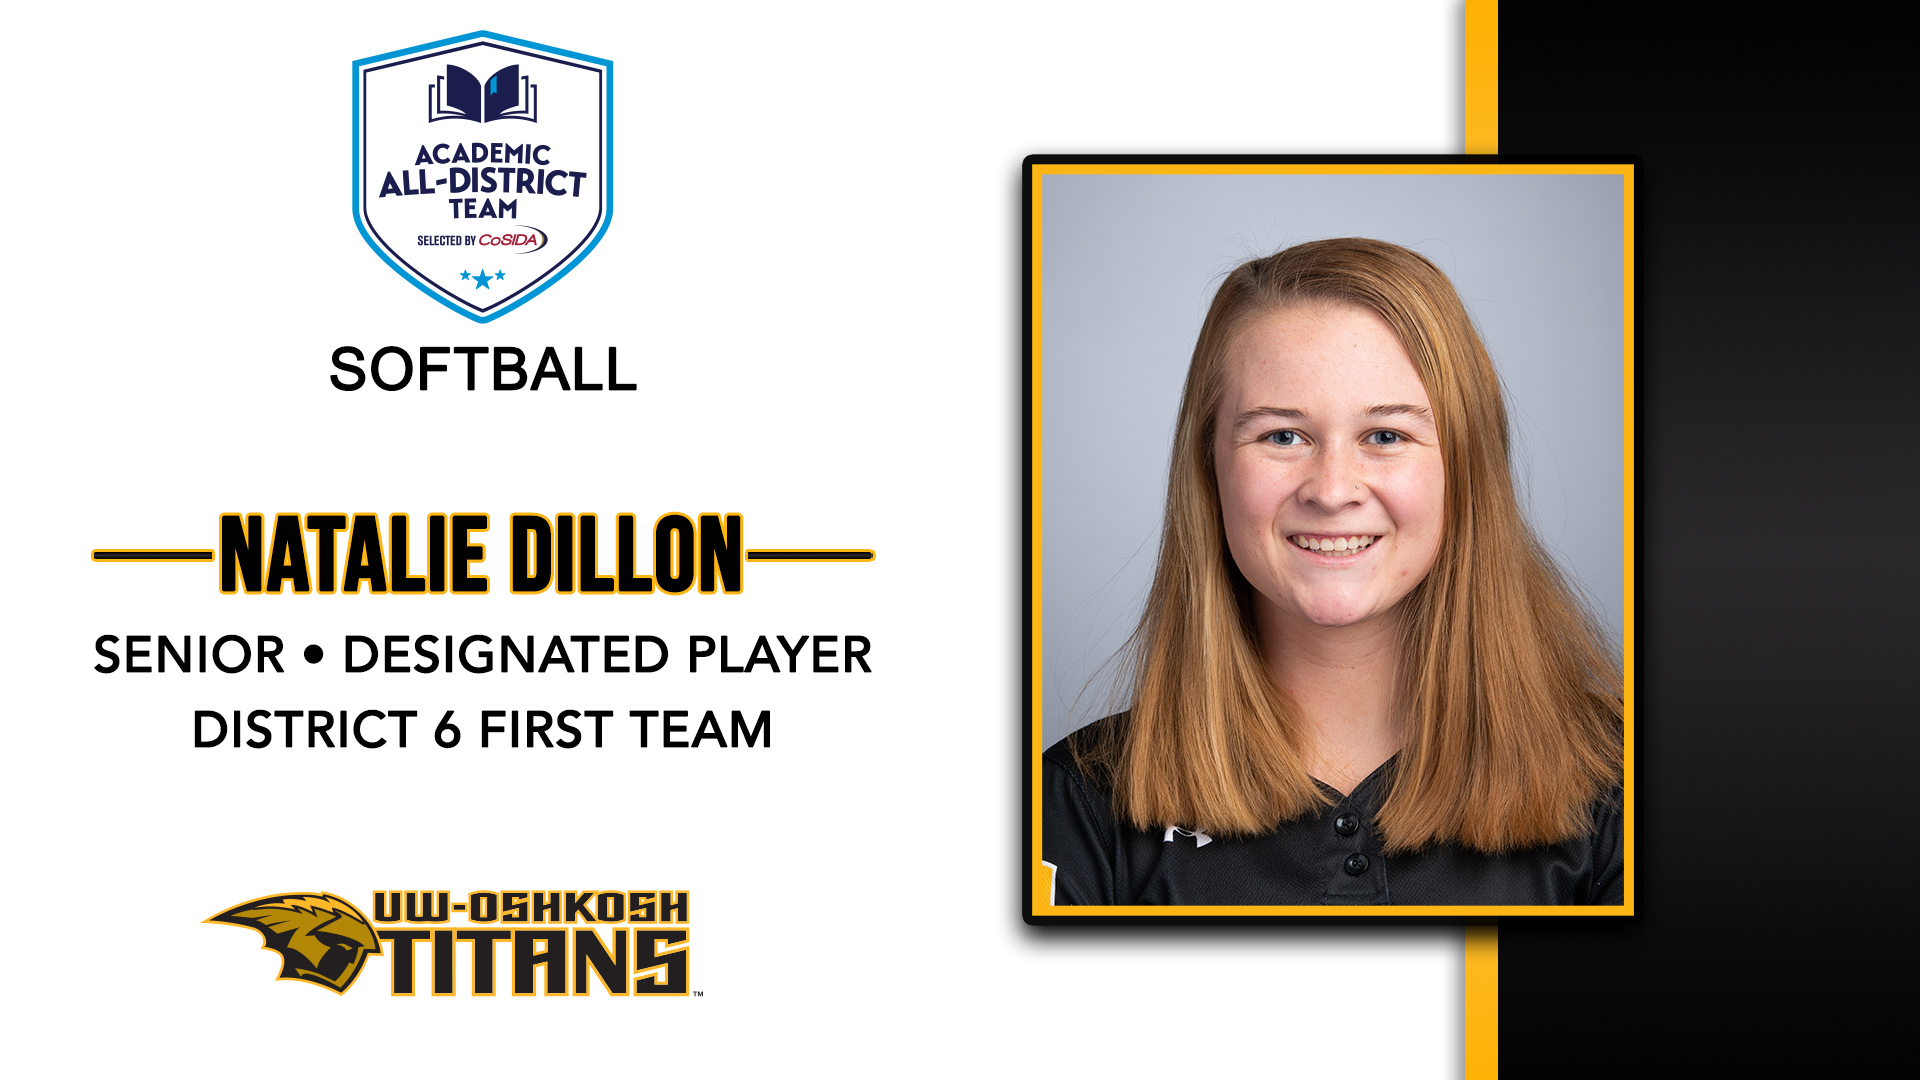 Dillon Receives Academic All-District Honors